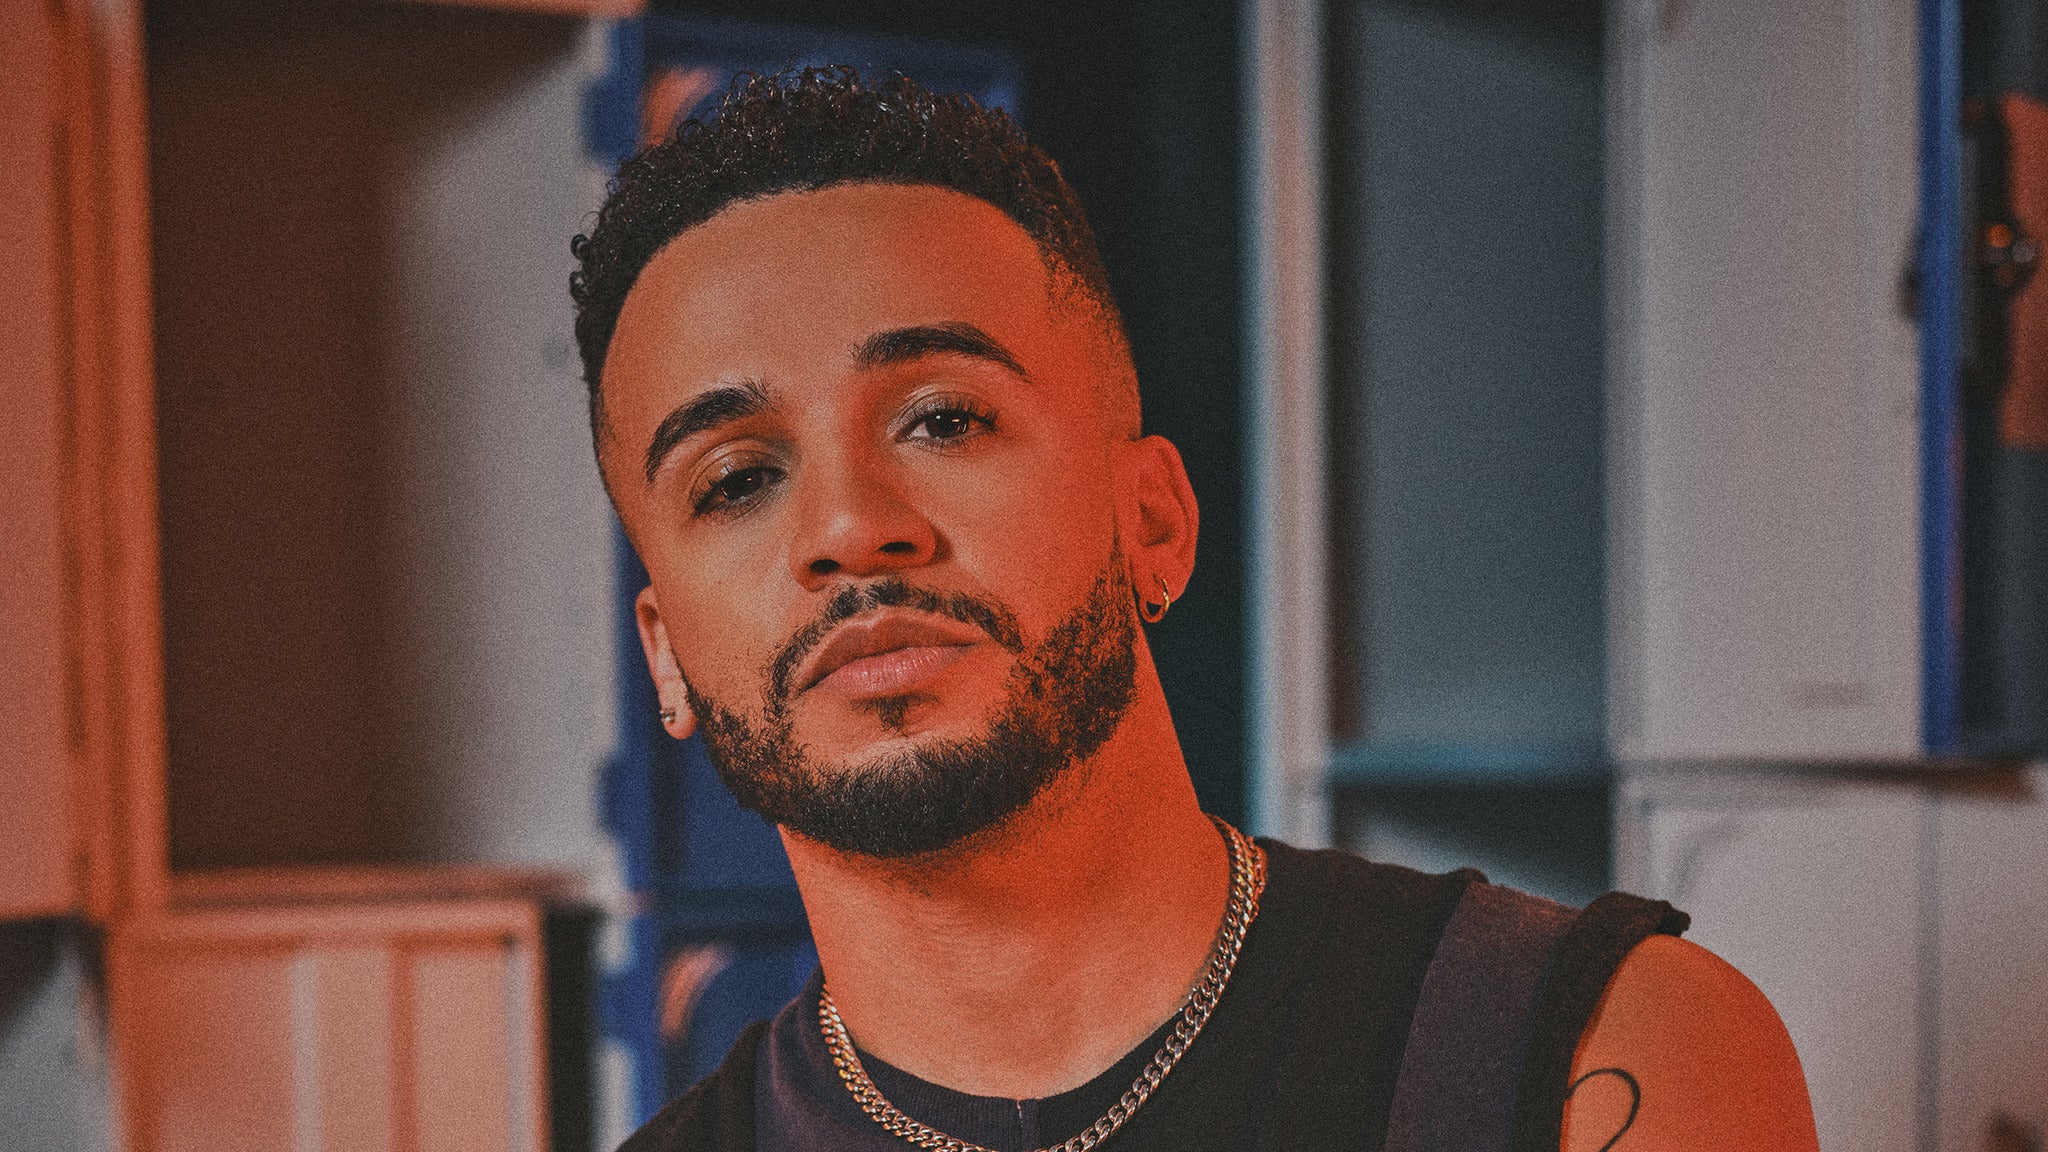 Image used with permission from Ticketmaster | Aston Merrygold tickets